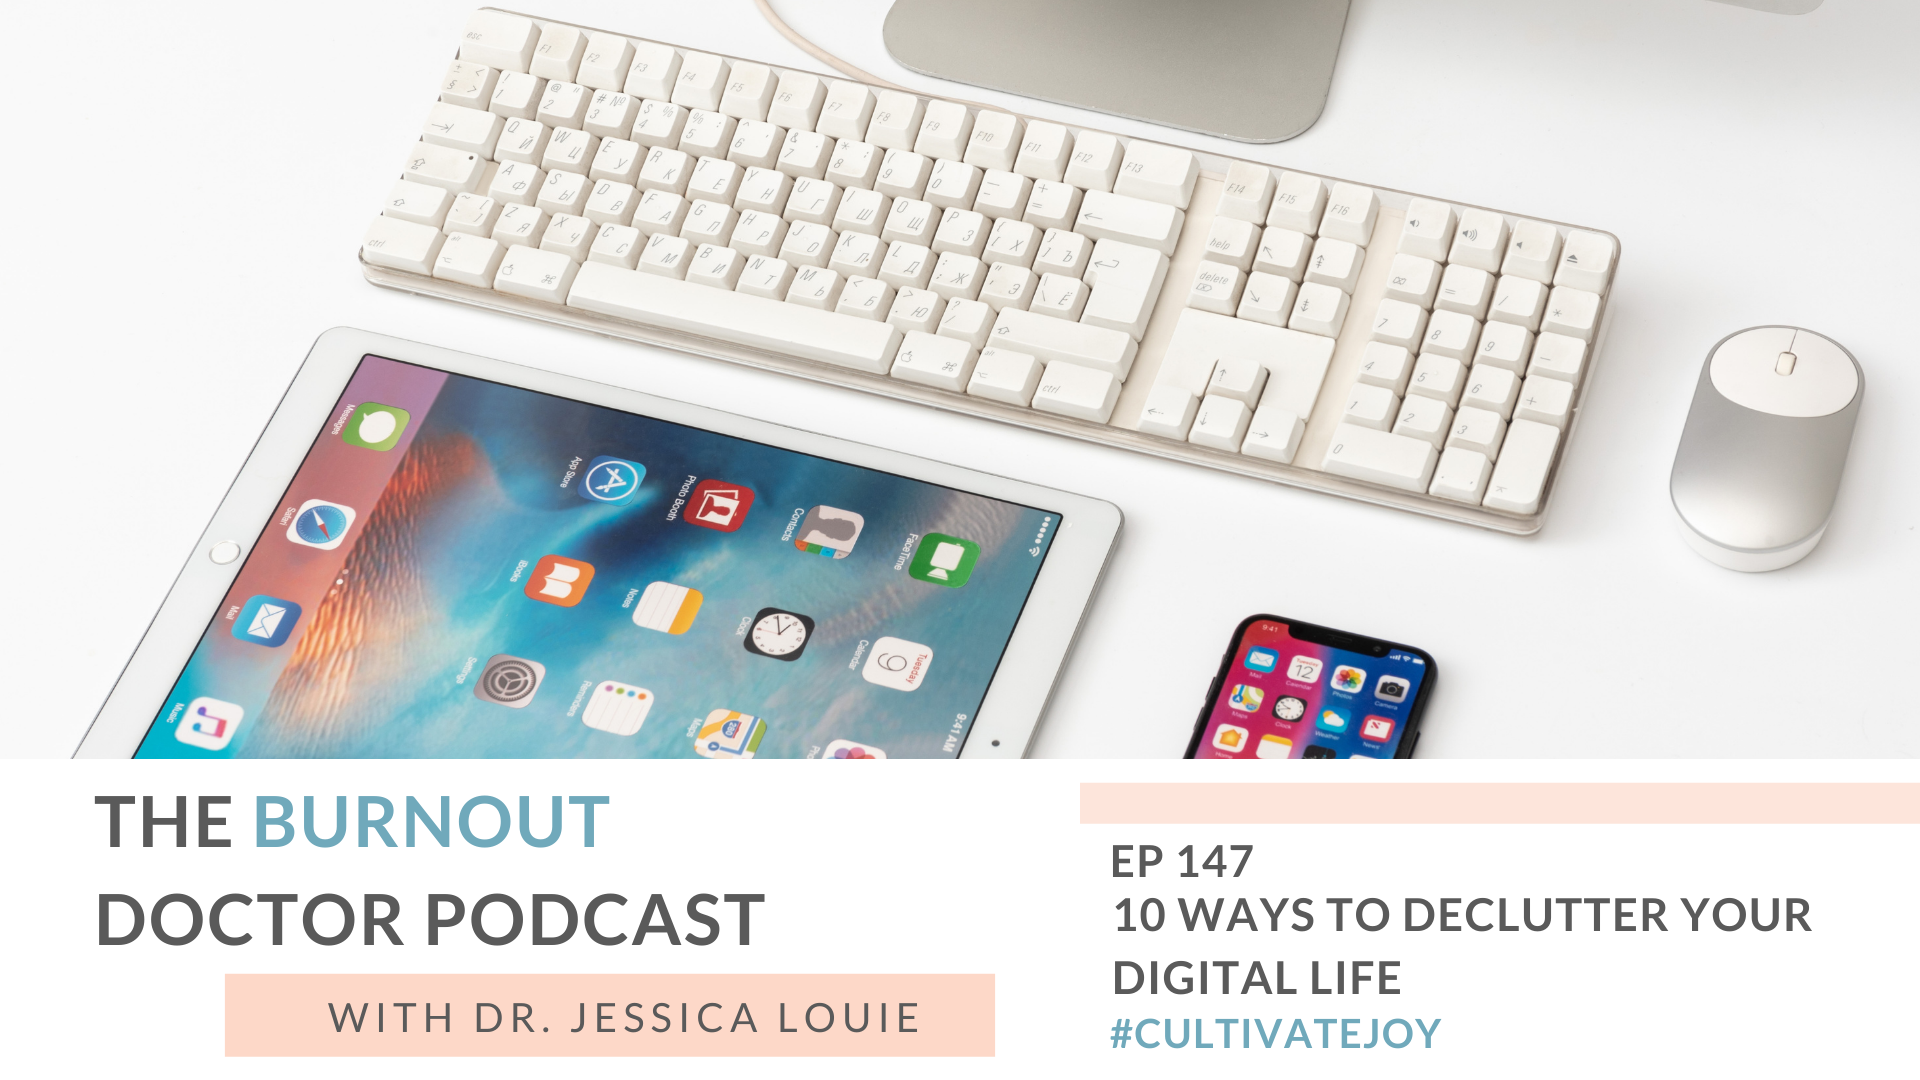 10 ways to declutter your digital life. Digital Decluttering workshop. How to set up iphone with less distractions. How to set up office for more focus. Mental clutter and burnout. Keynote speaker Dr. Jessica Louie. The burnout doctor.